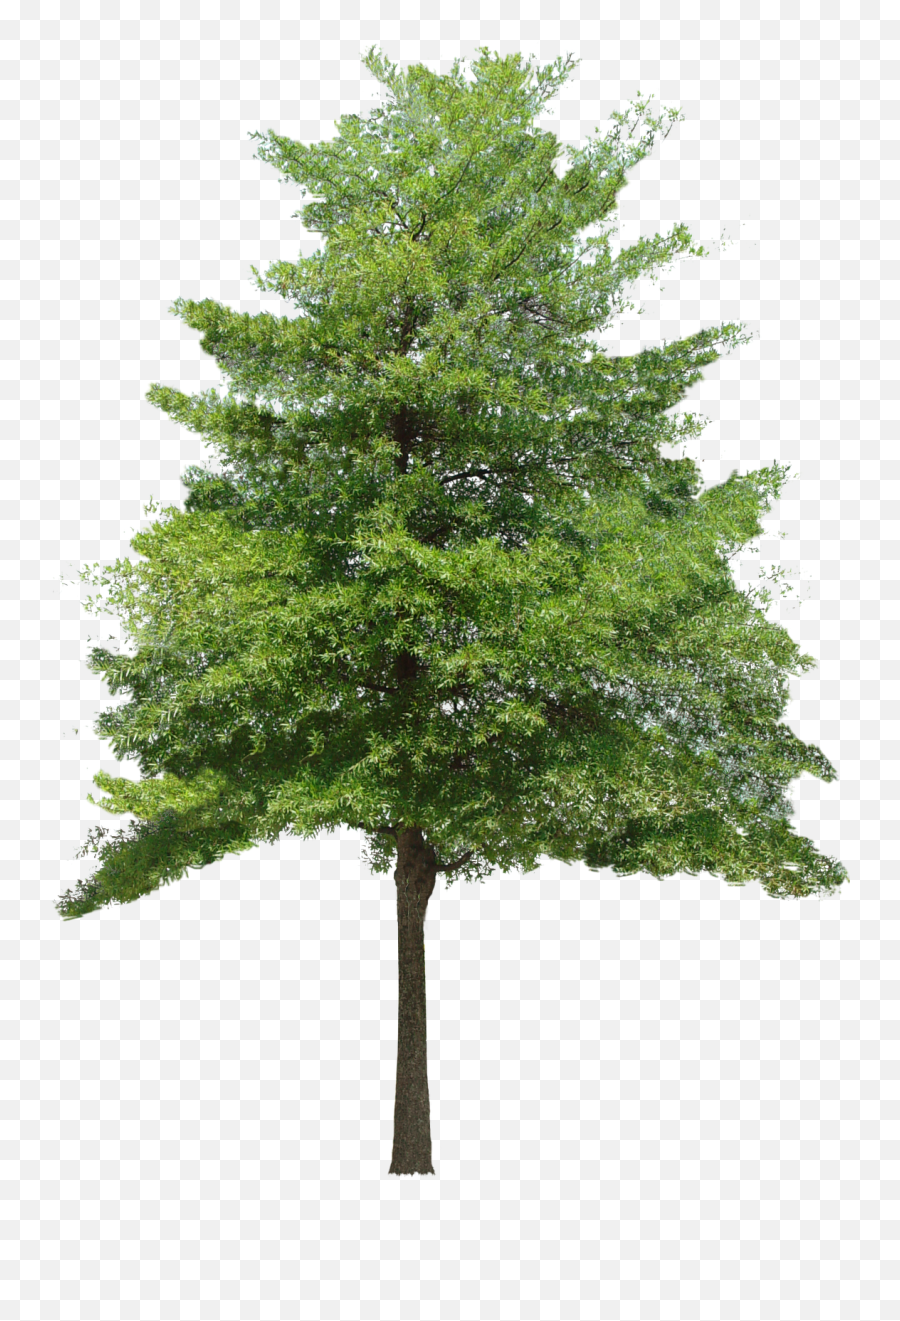 Tree Hd Png Transparent Hdpng Images Pluspng - Tree Texture Transparent Background,Tree From Above Png